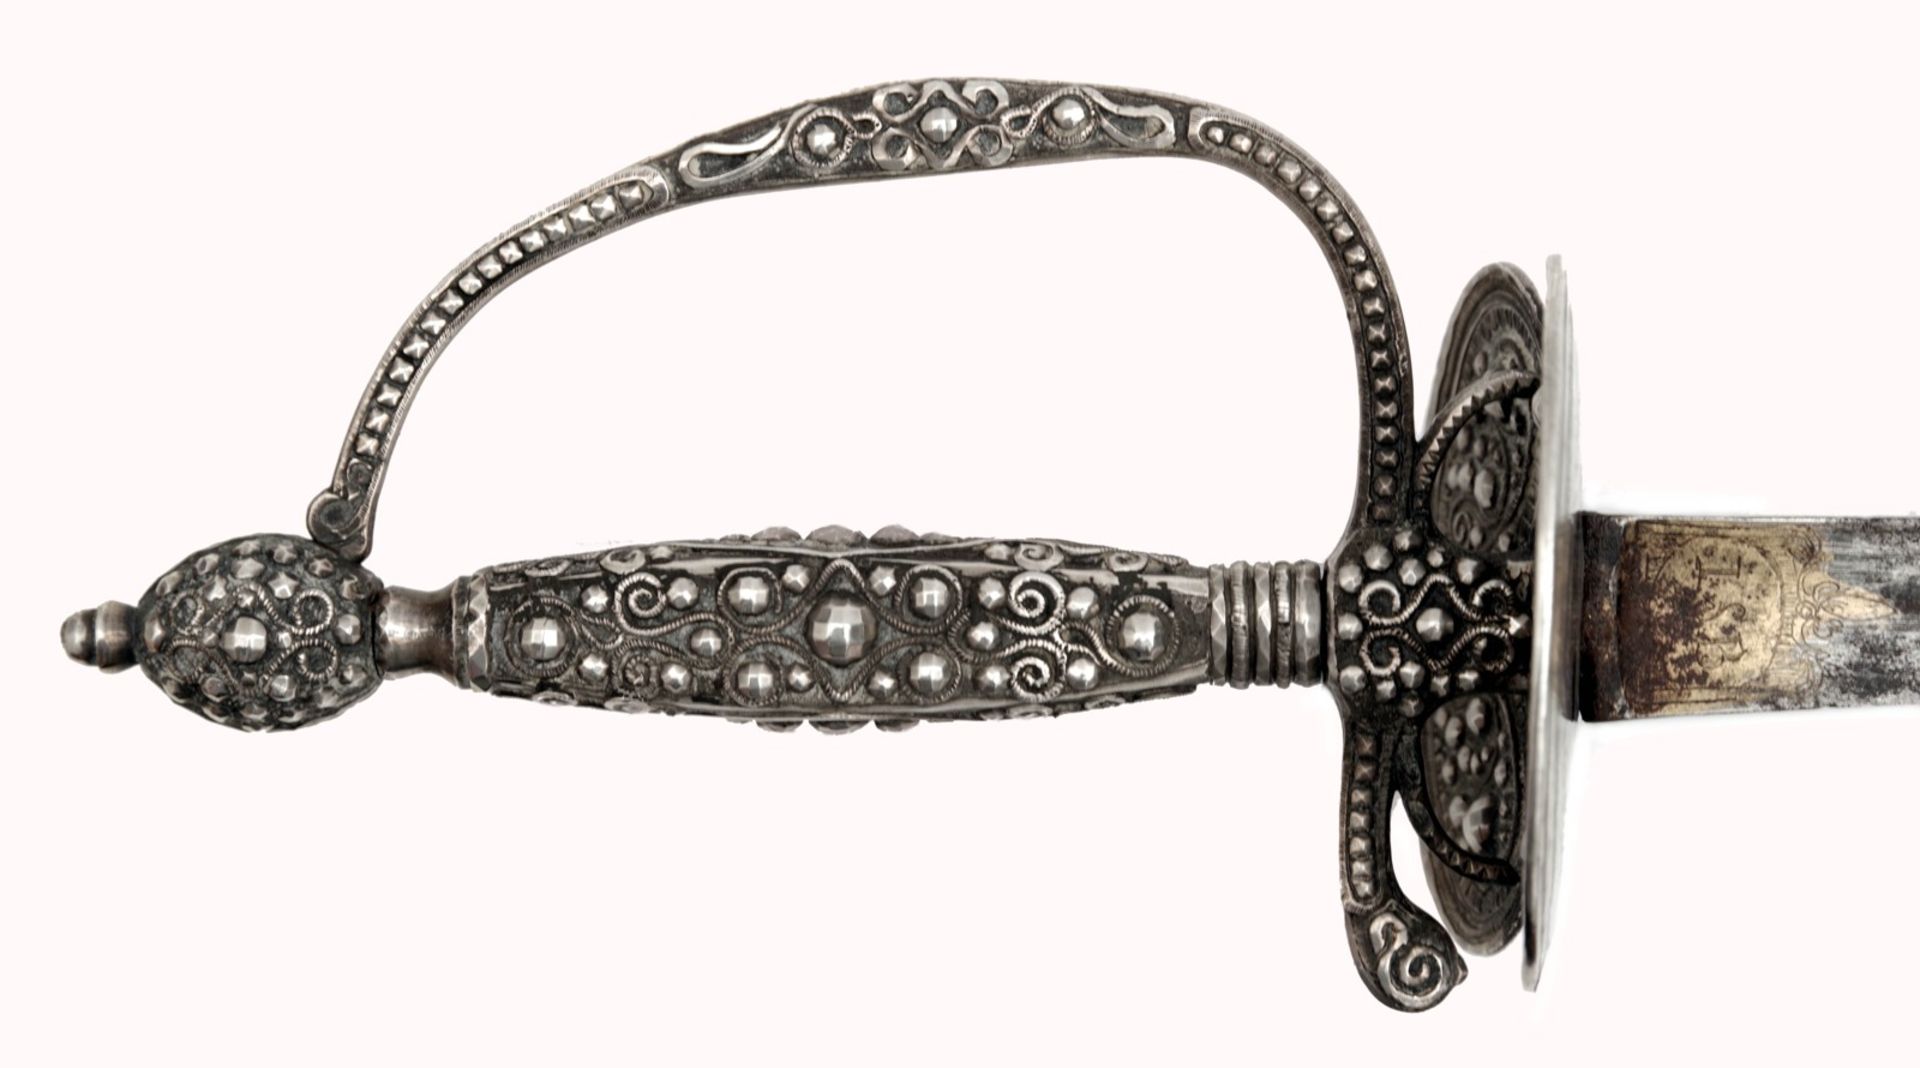 A French Silver-Hilted Small-Sword - Image 3 of 6